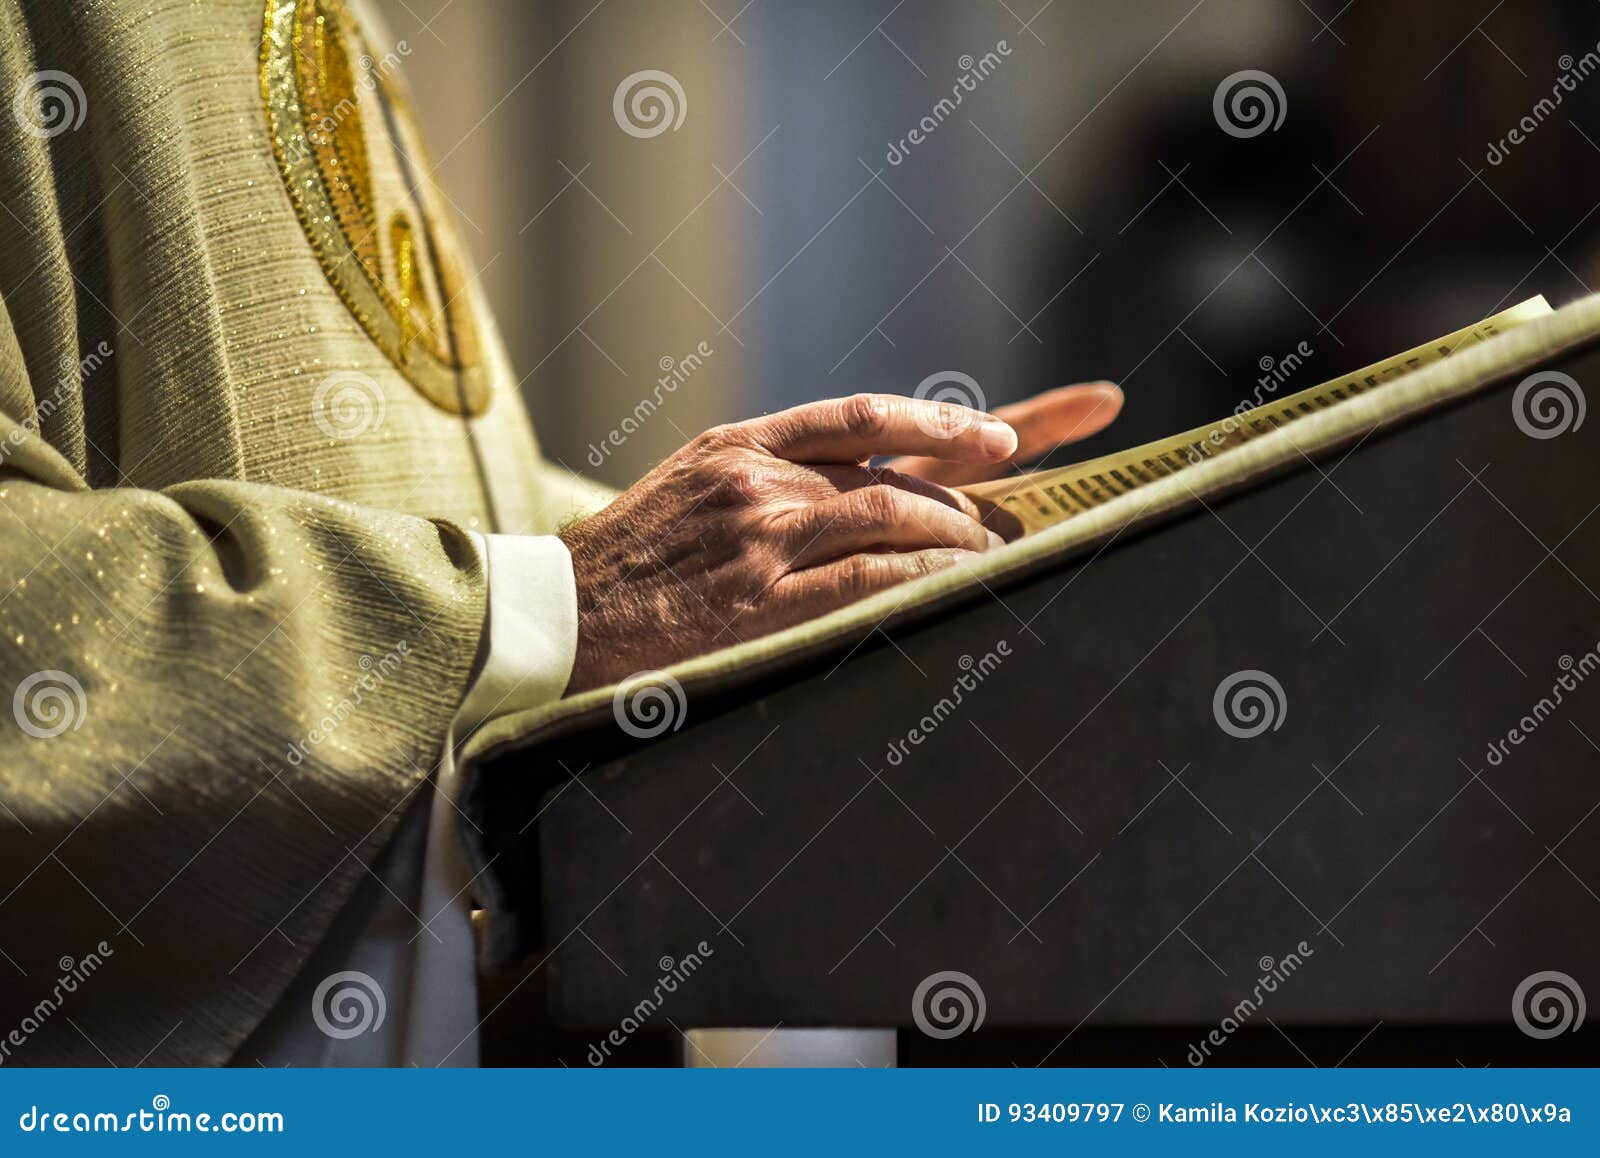 hands of catholic priest reading a bible.